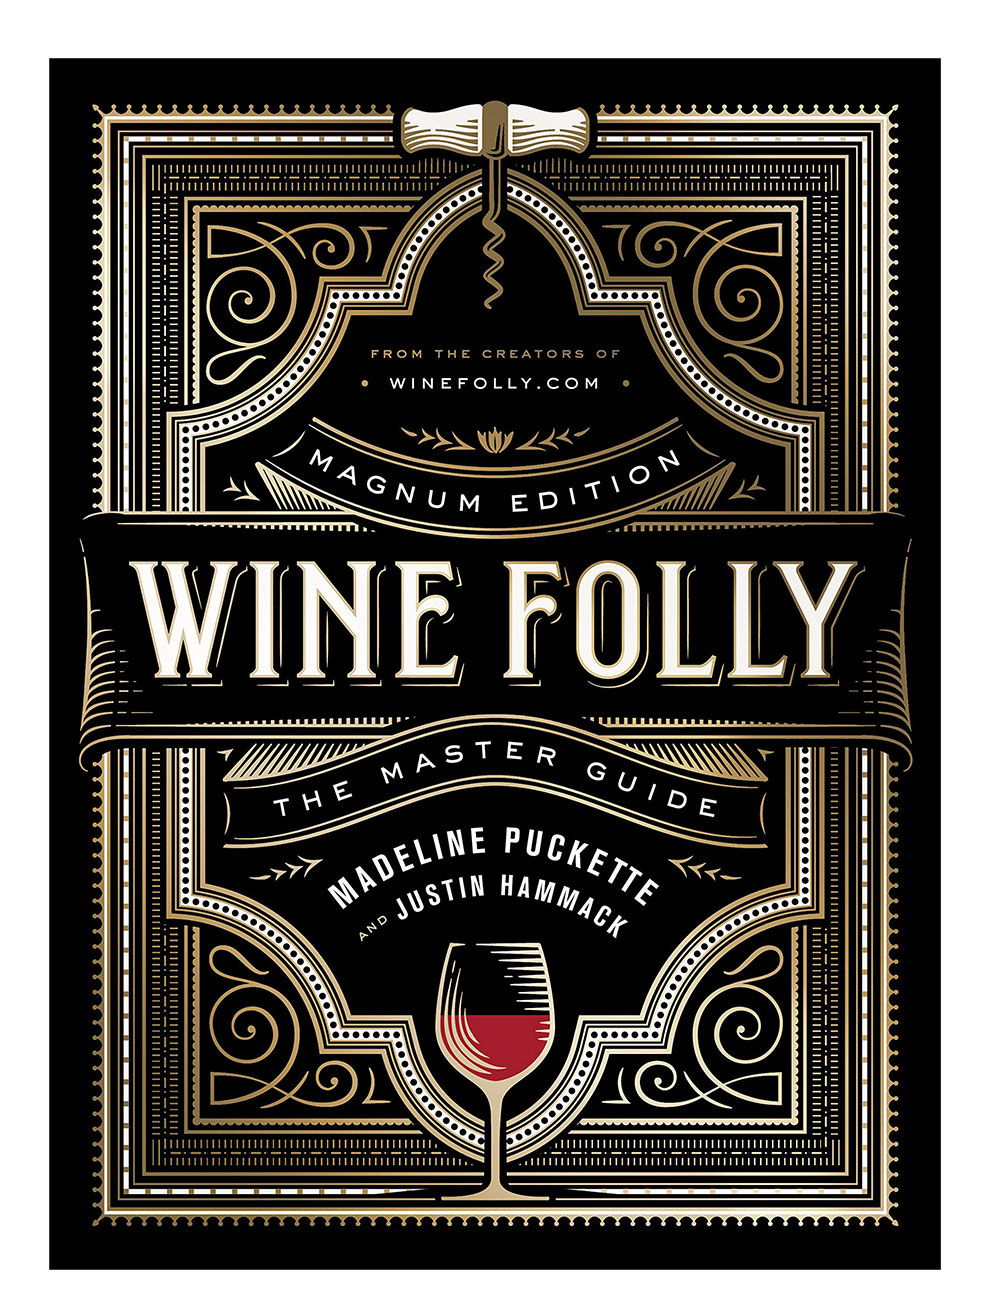 Wine Folly: Magnum Edition: The Master Guide.